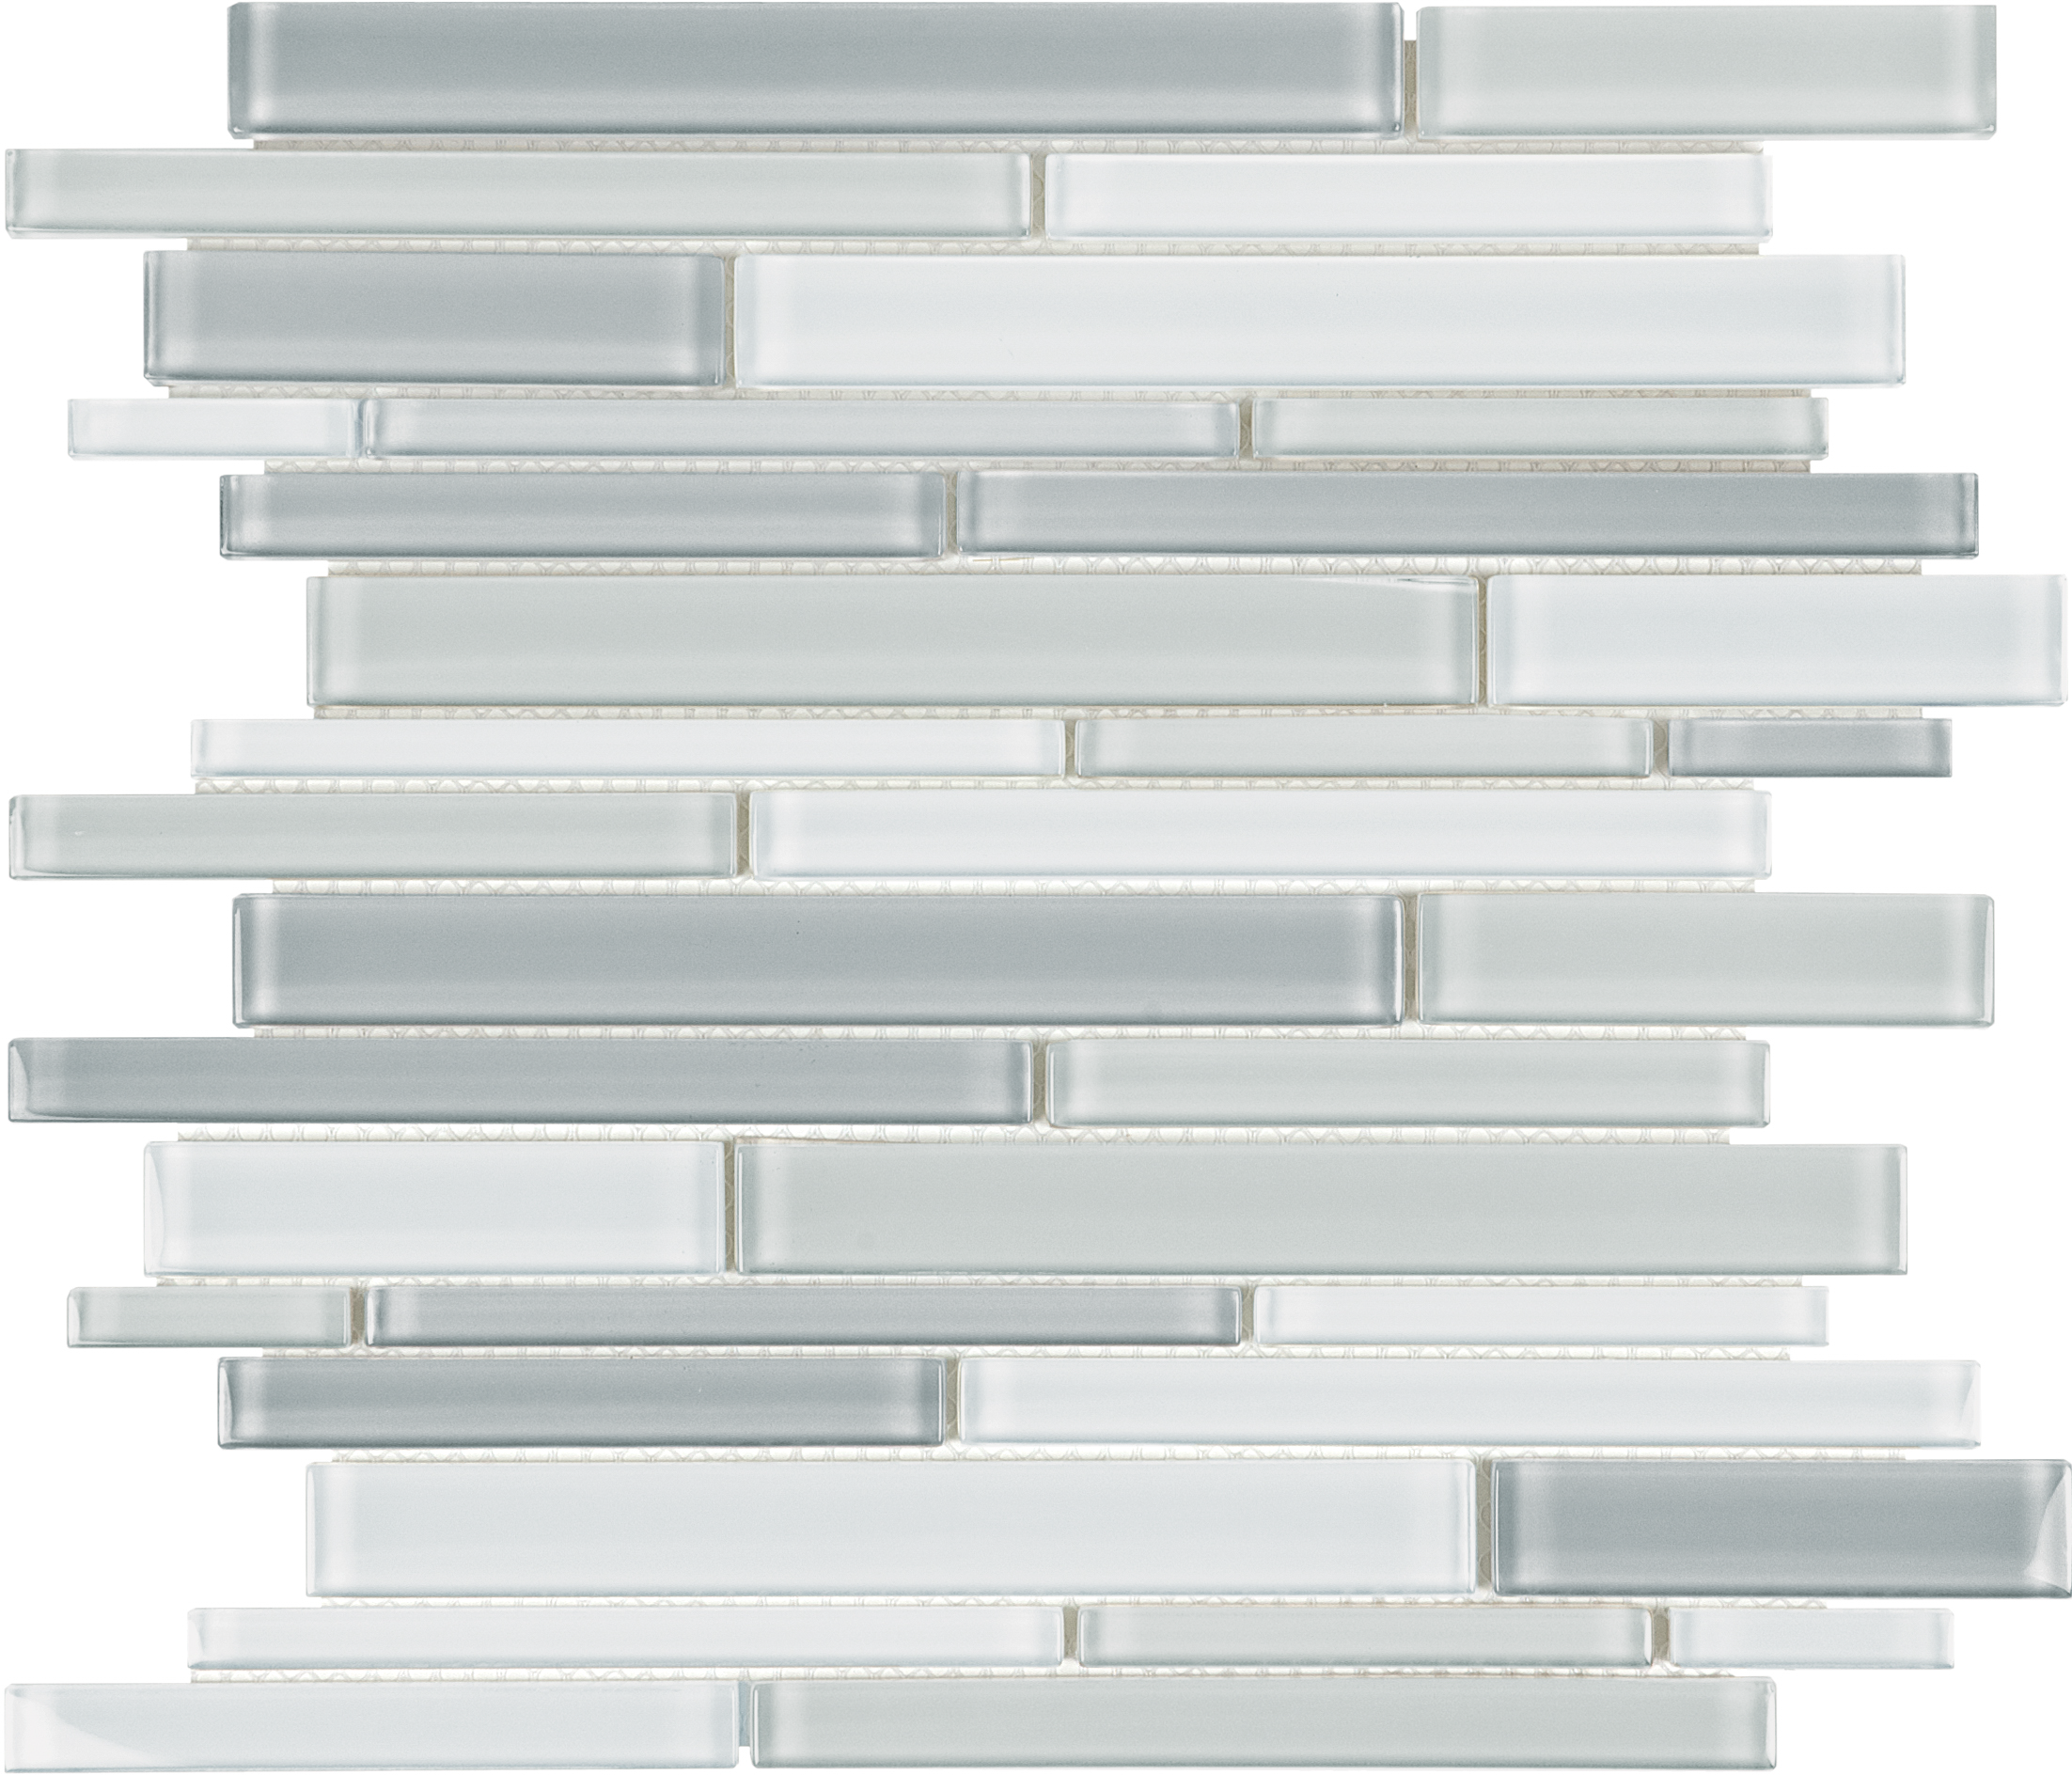 shades of grey random strip pattern fused glass mosaic glass blend from element anatolia collection distributed by surface group international glossy finish rounded edge mesh shape